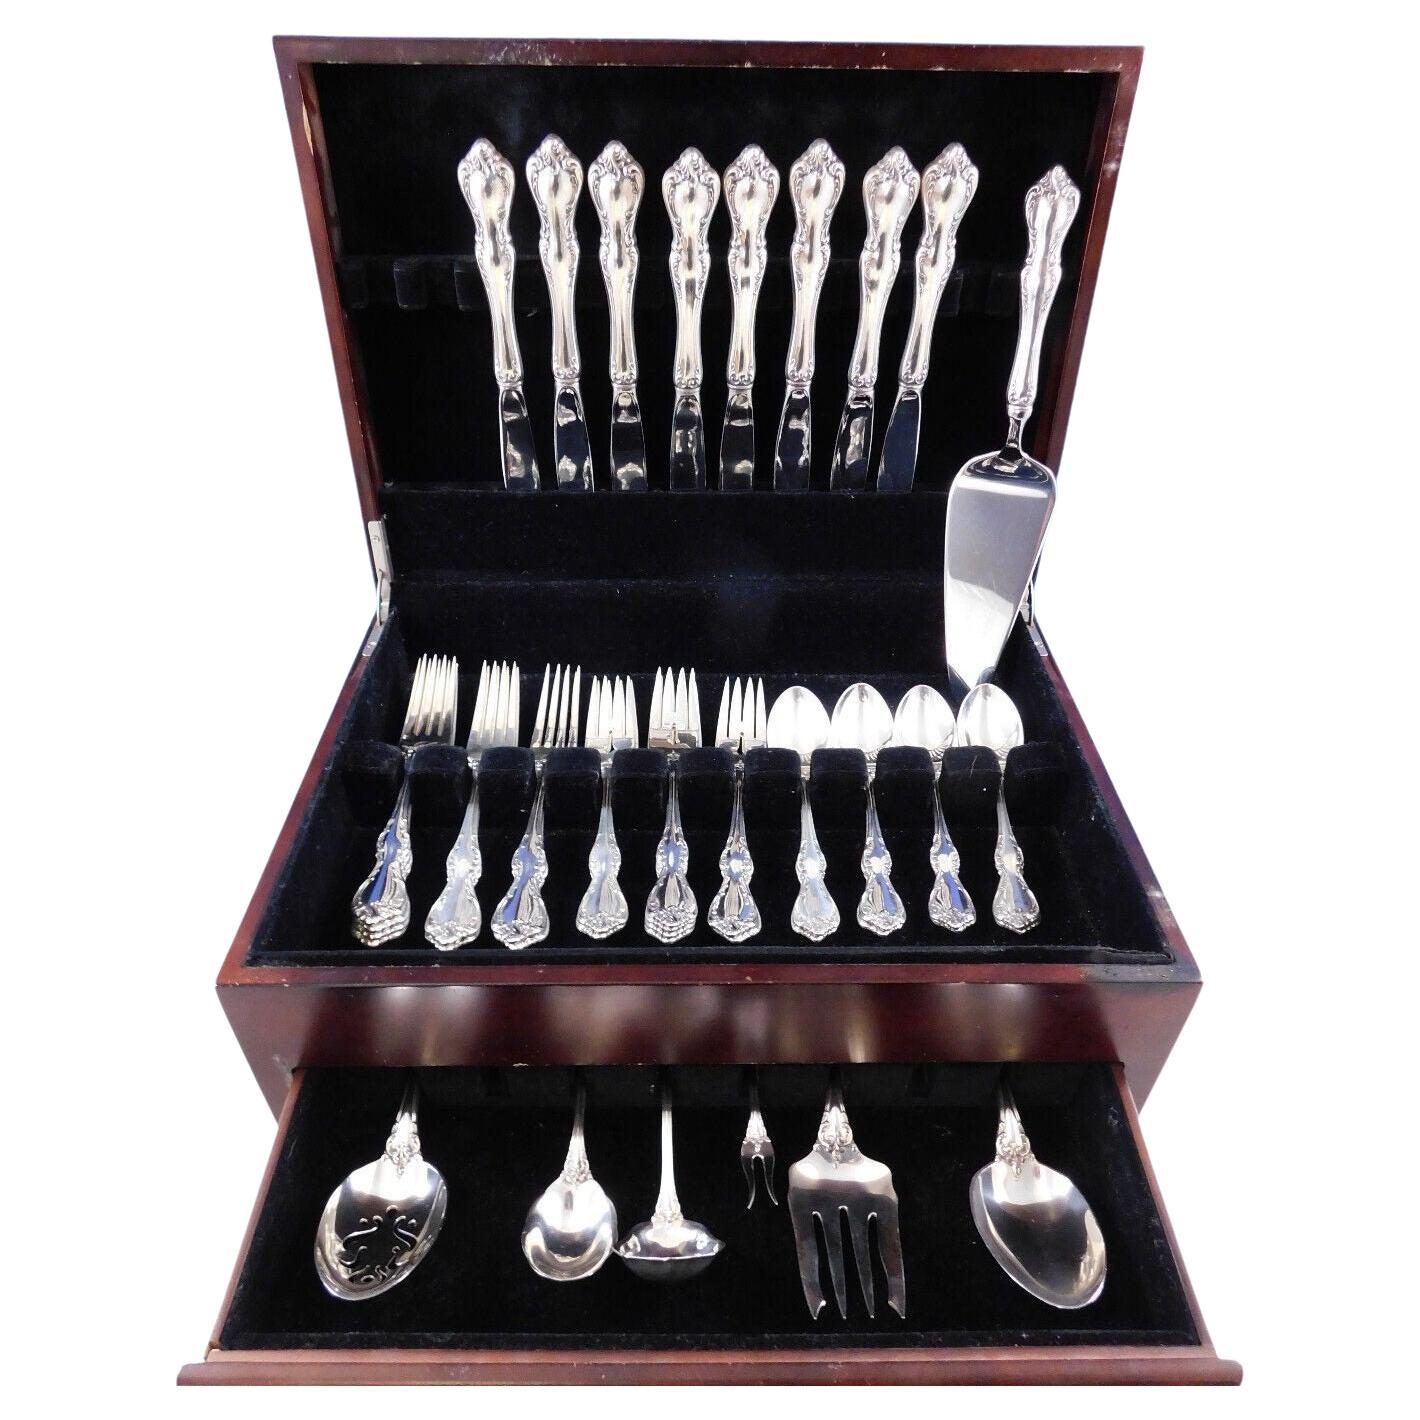 https://a.1stdibscdn.com/debussy-by-towle-sterling-silver-flatware-set-for-8-service-39-pcs-for-sale/f_10224/f_333177821678915359366/f_33317782_1678915359836_bg_processed.jpg